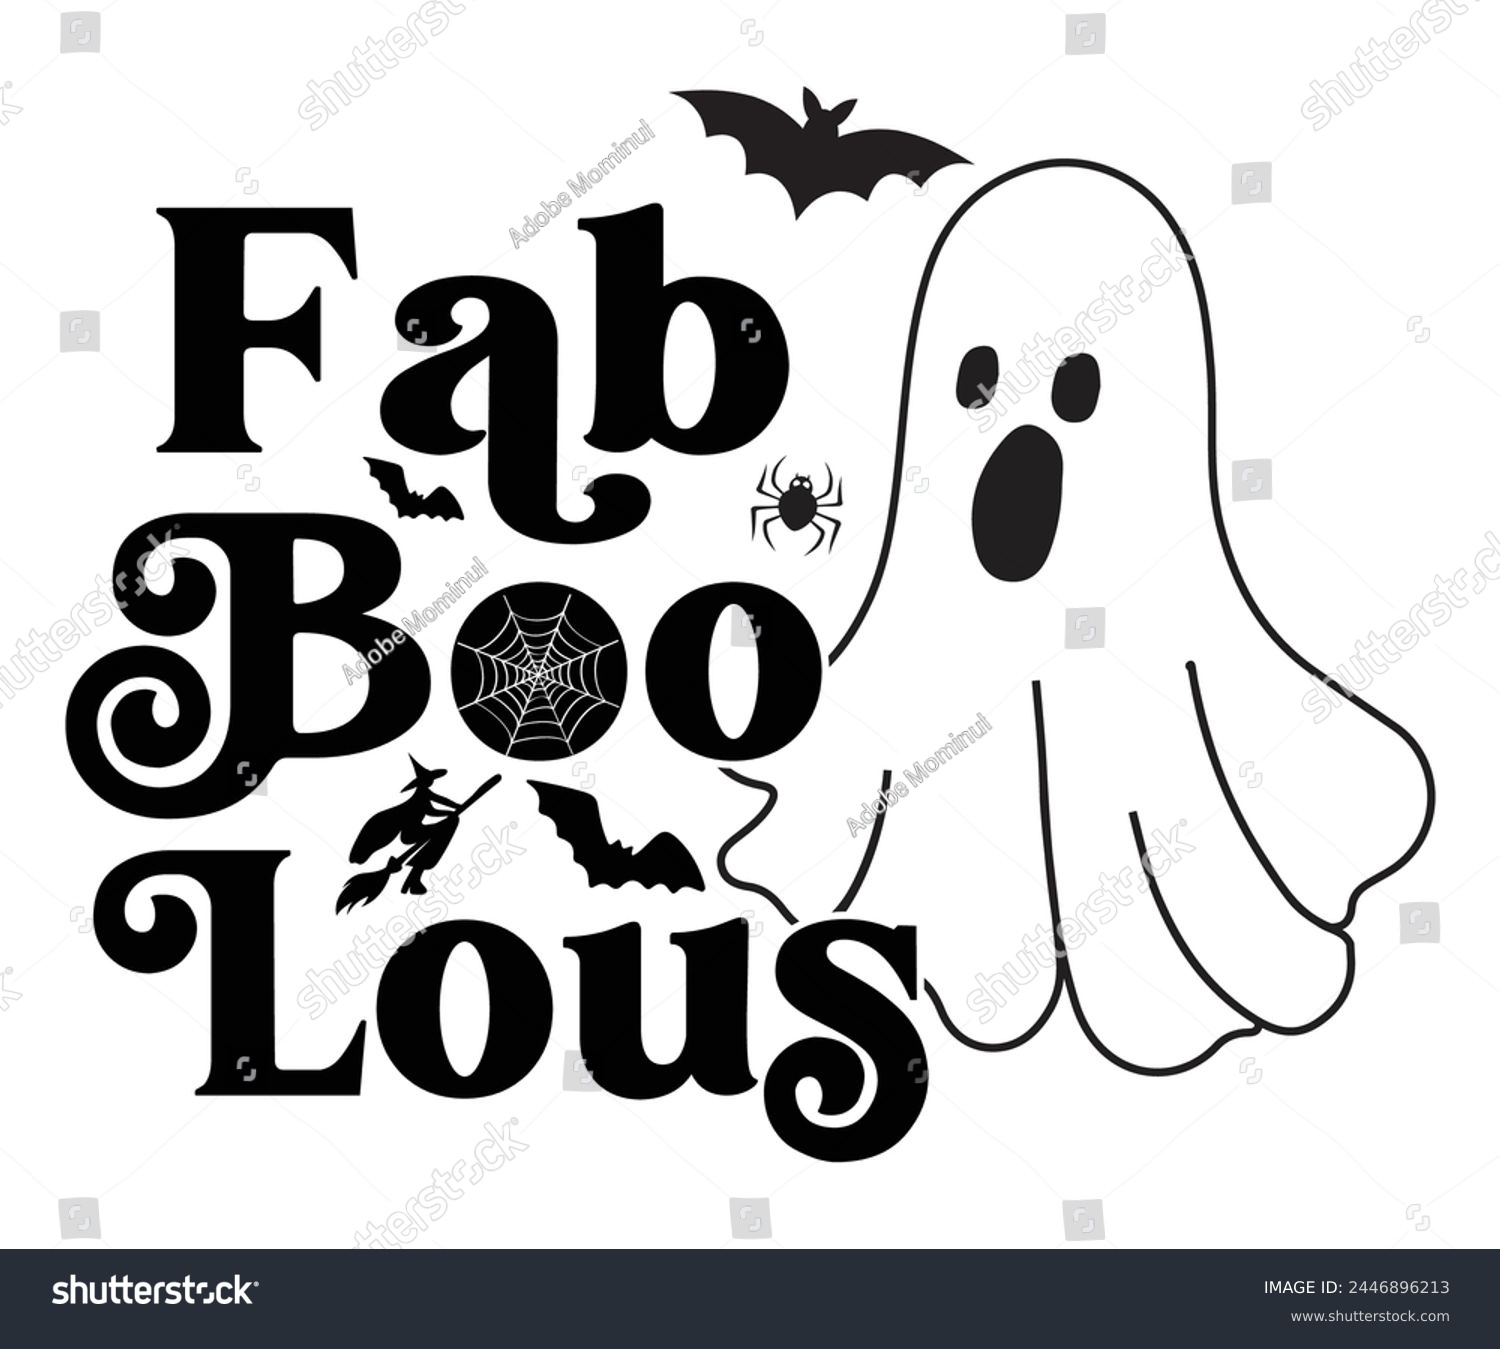 SVG of Fab Boo Lous Svg,Halloween Svg,Typography,Halloween Quotes,Witches Svg,Halloween Party,Halloween Costume,Halloween Gift,Funny Halloween,Spooky Svg,Funny T shirt,Ghost Svg,Cut file svg